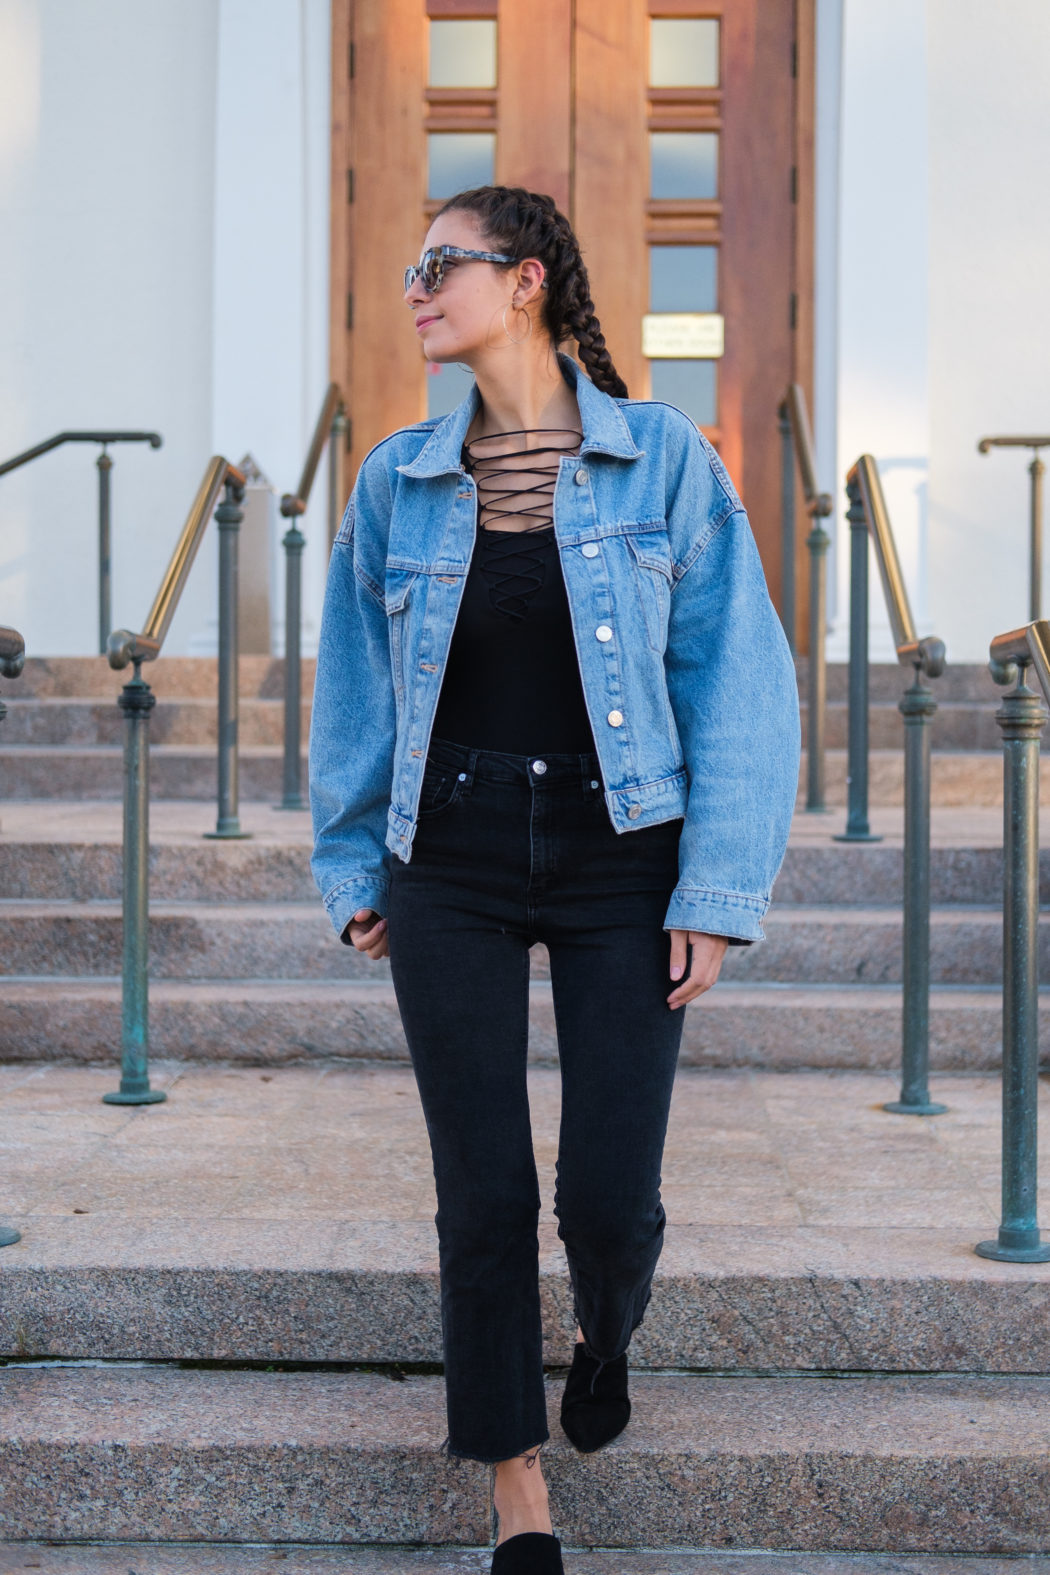 Where can I find an oversized denim jacket like this? I'm looking